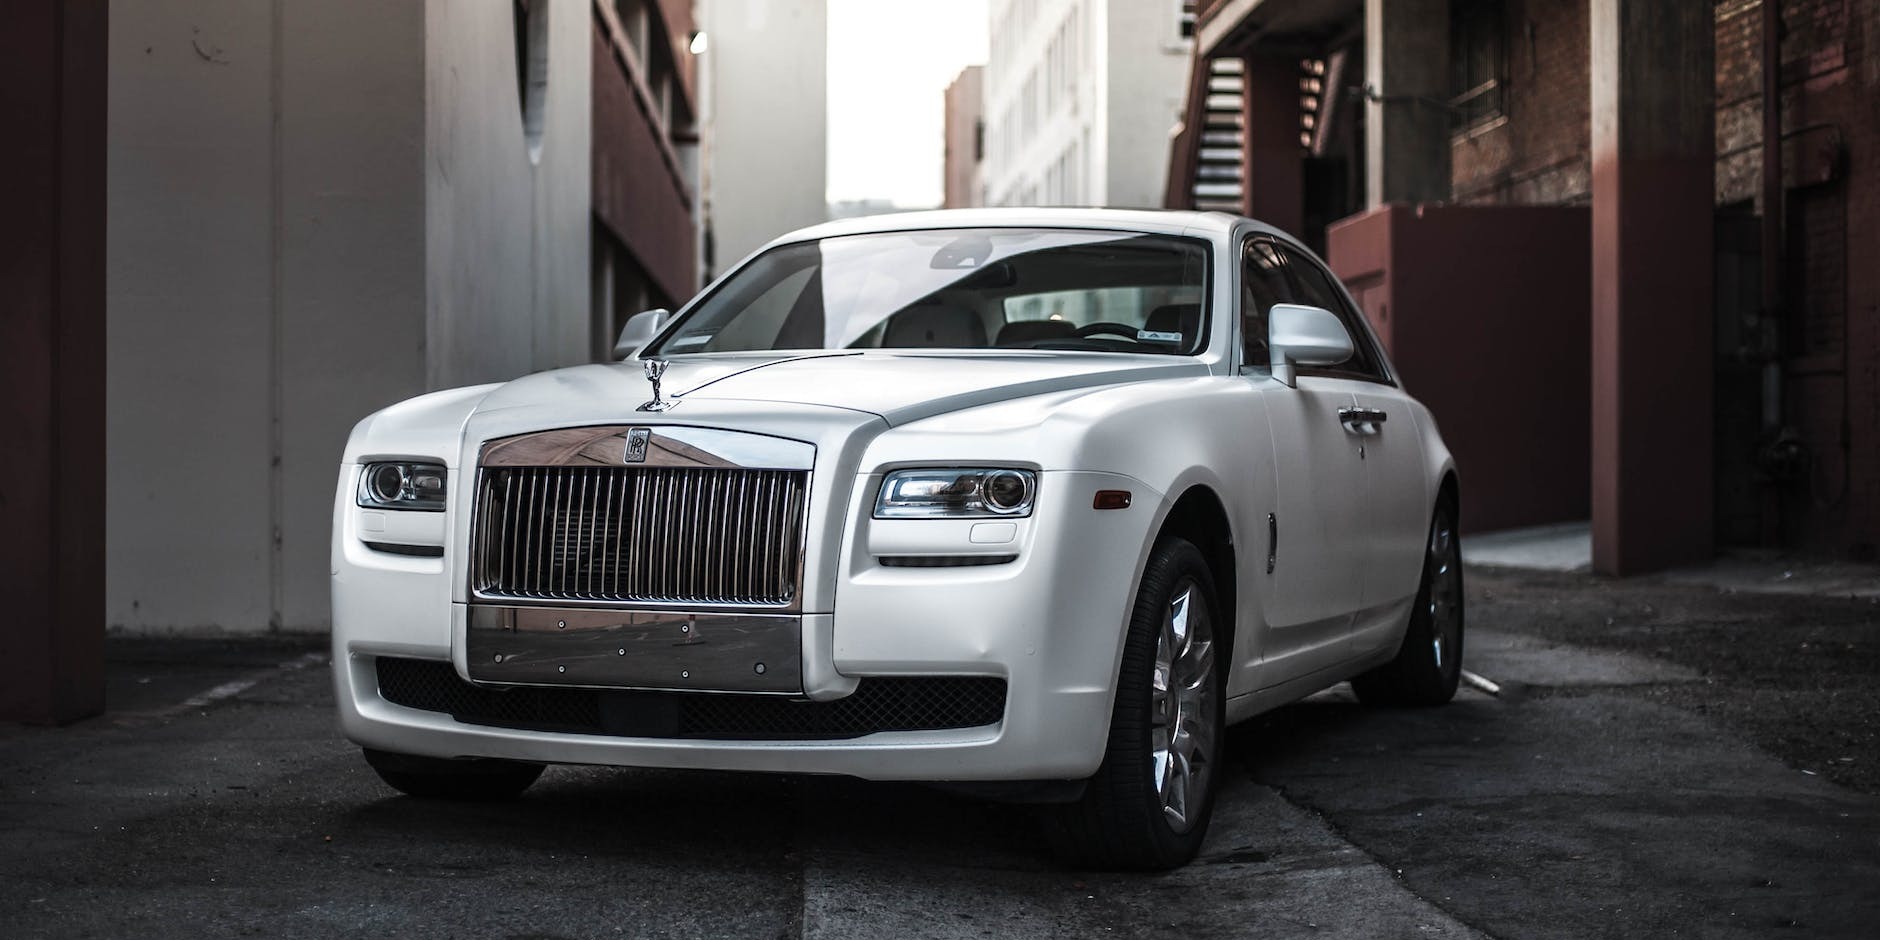 The Ultimate Guide to Choosing a Rolls Royce for Your Northern Ireland Wedding